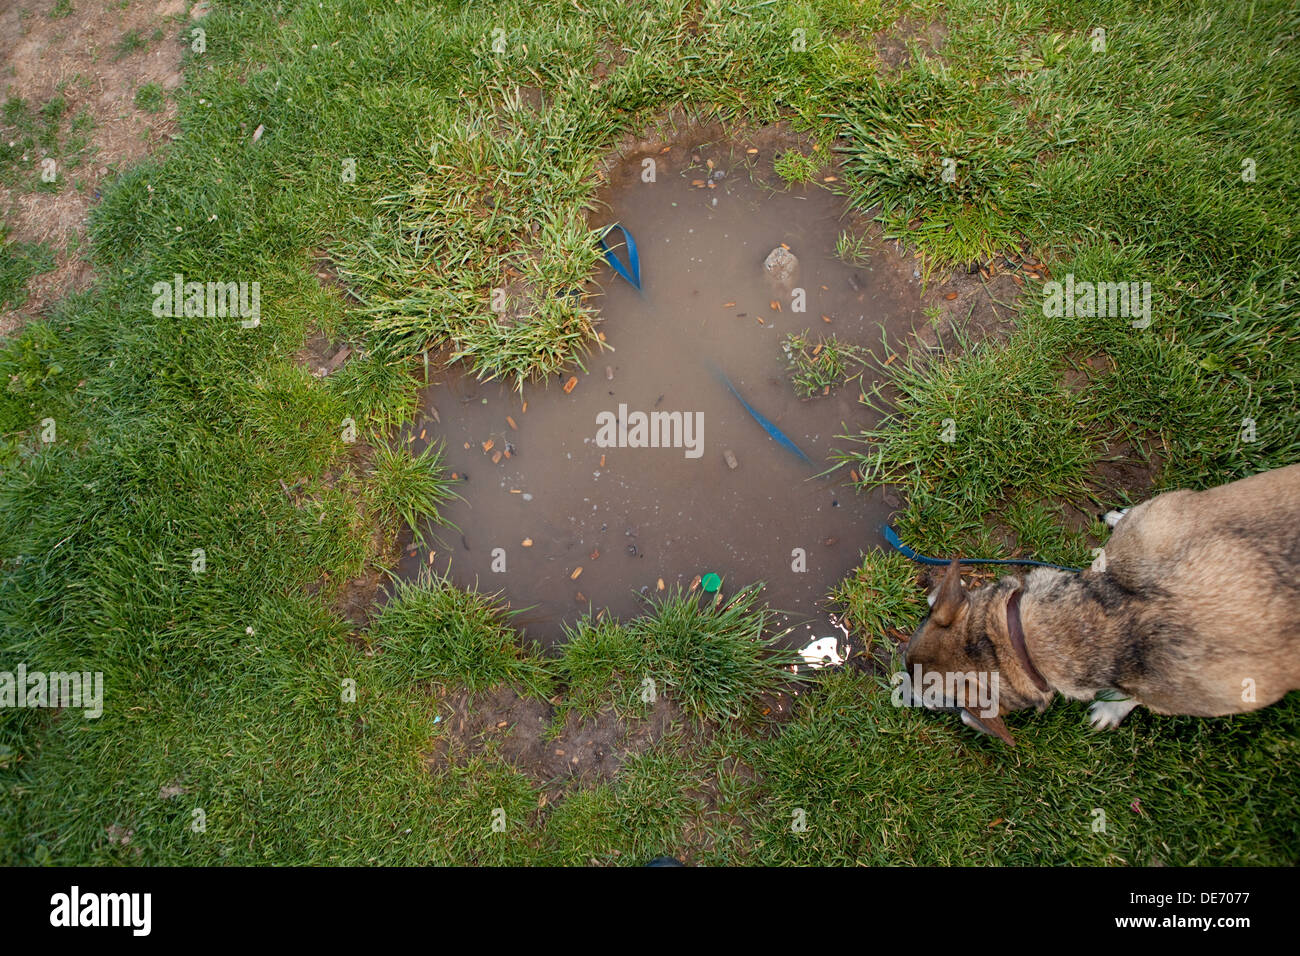 dog smelling grass and puddles in a park. Stock Photo